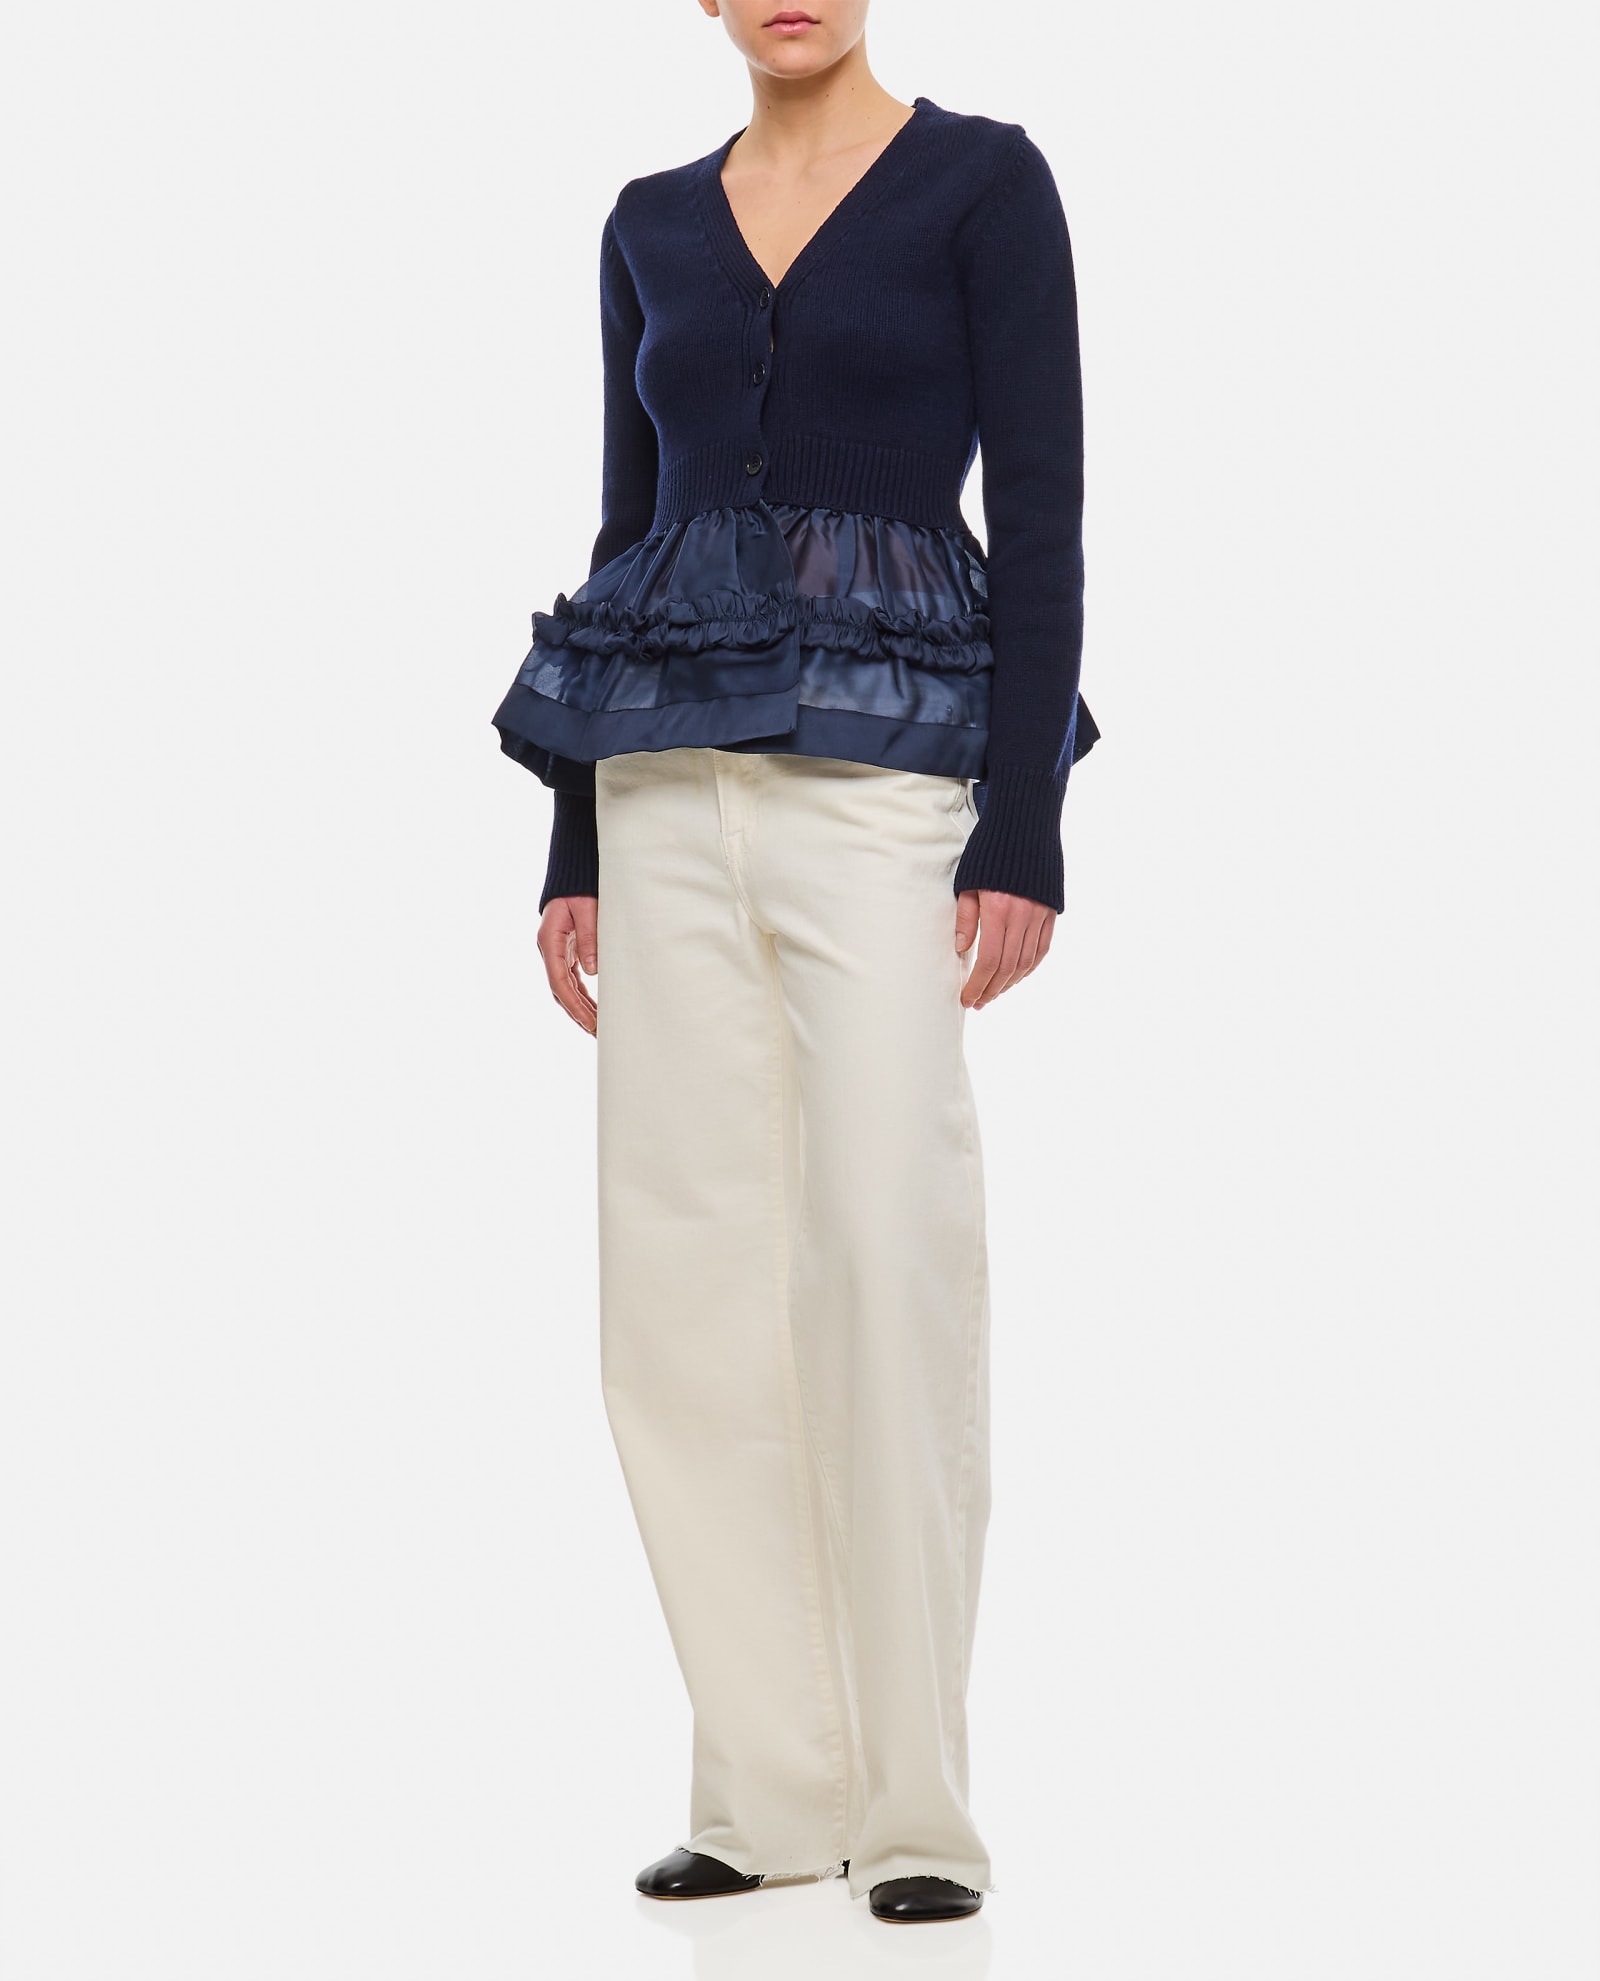 CECILIE BAHNSEN VISION RECYCLED CASHMERE CARDIGAN